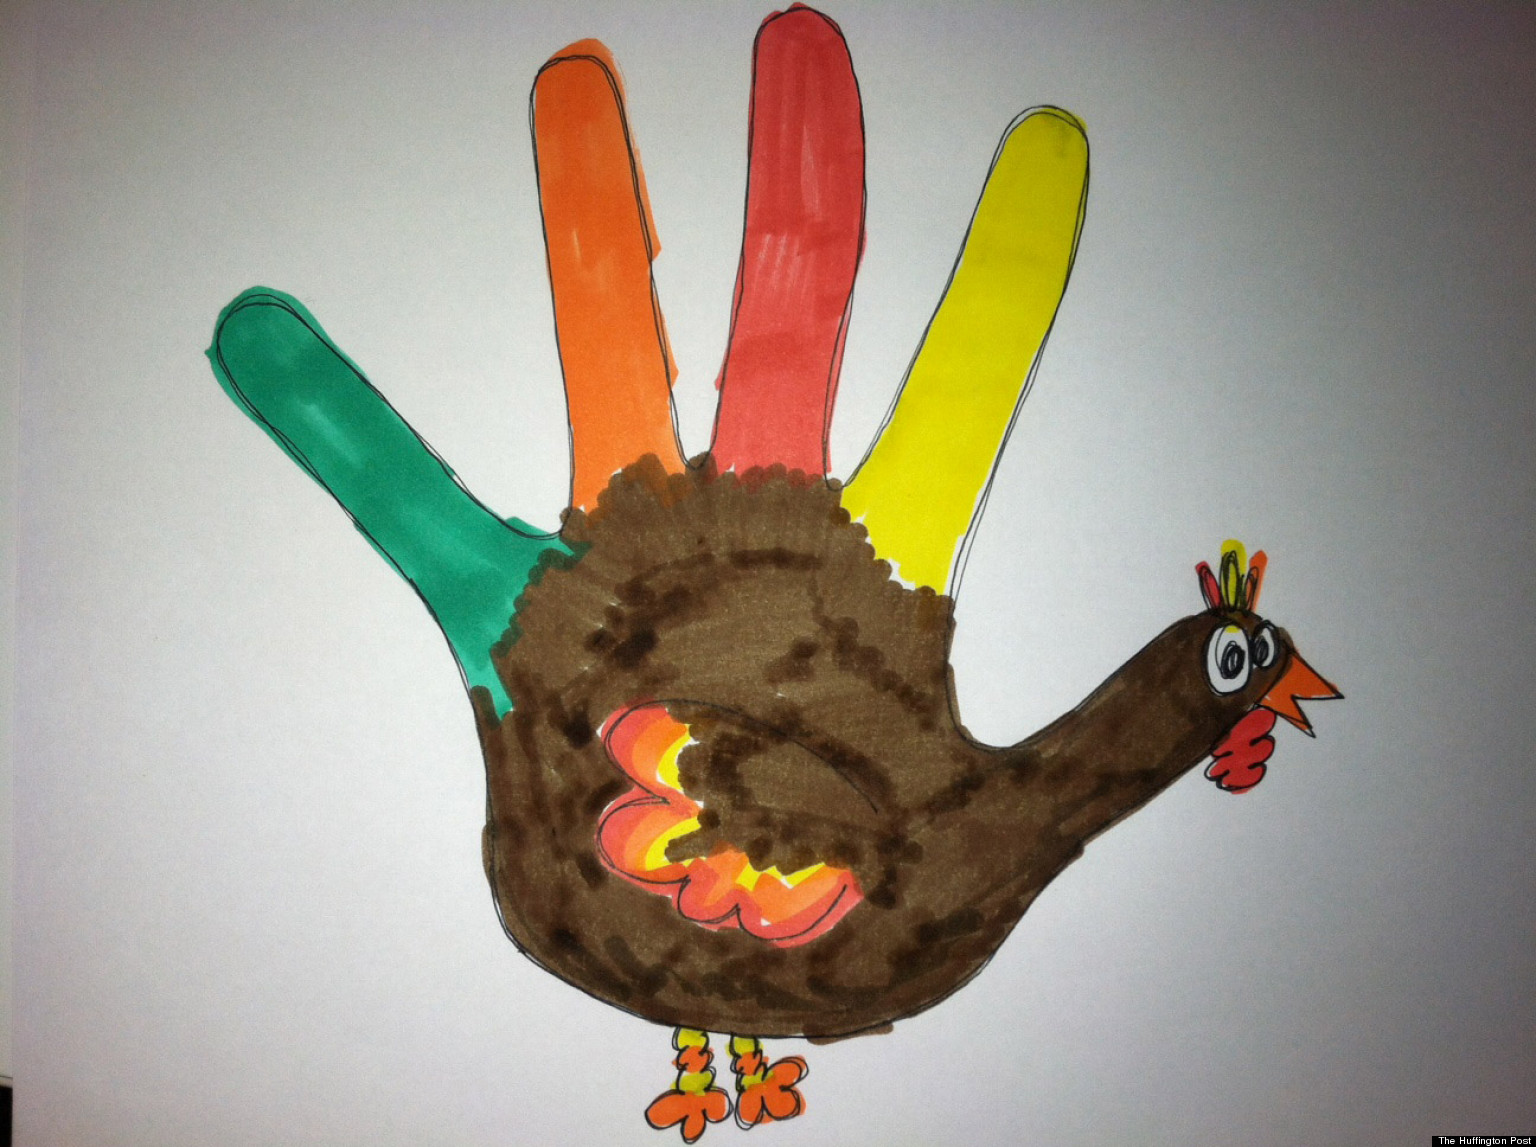 Hand Turkey Drawings: Celebrate Thanksgiving By Sending Us Your